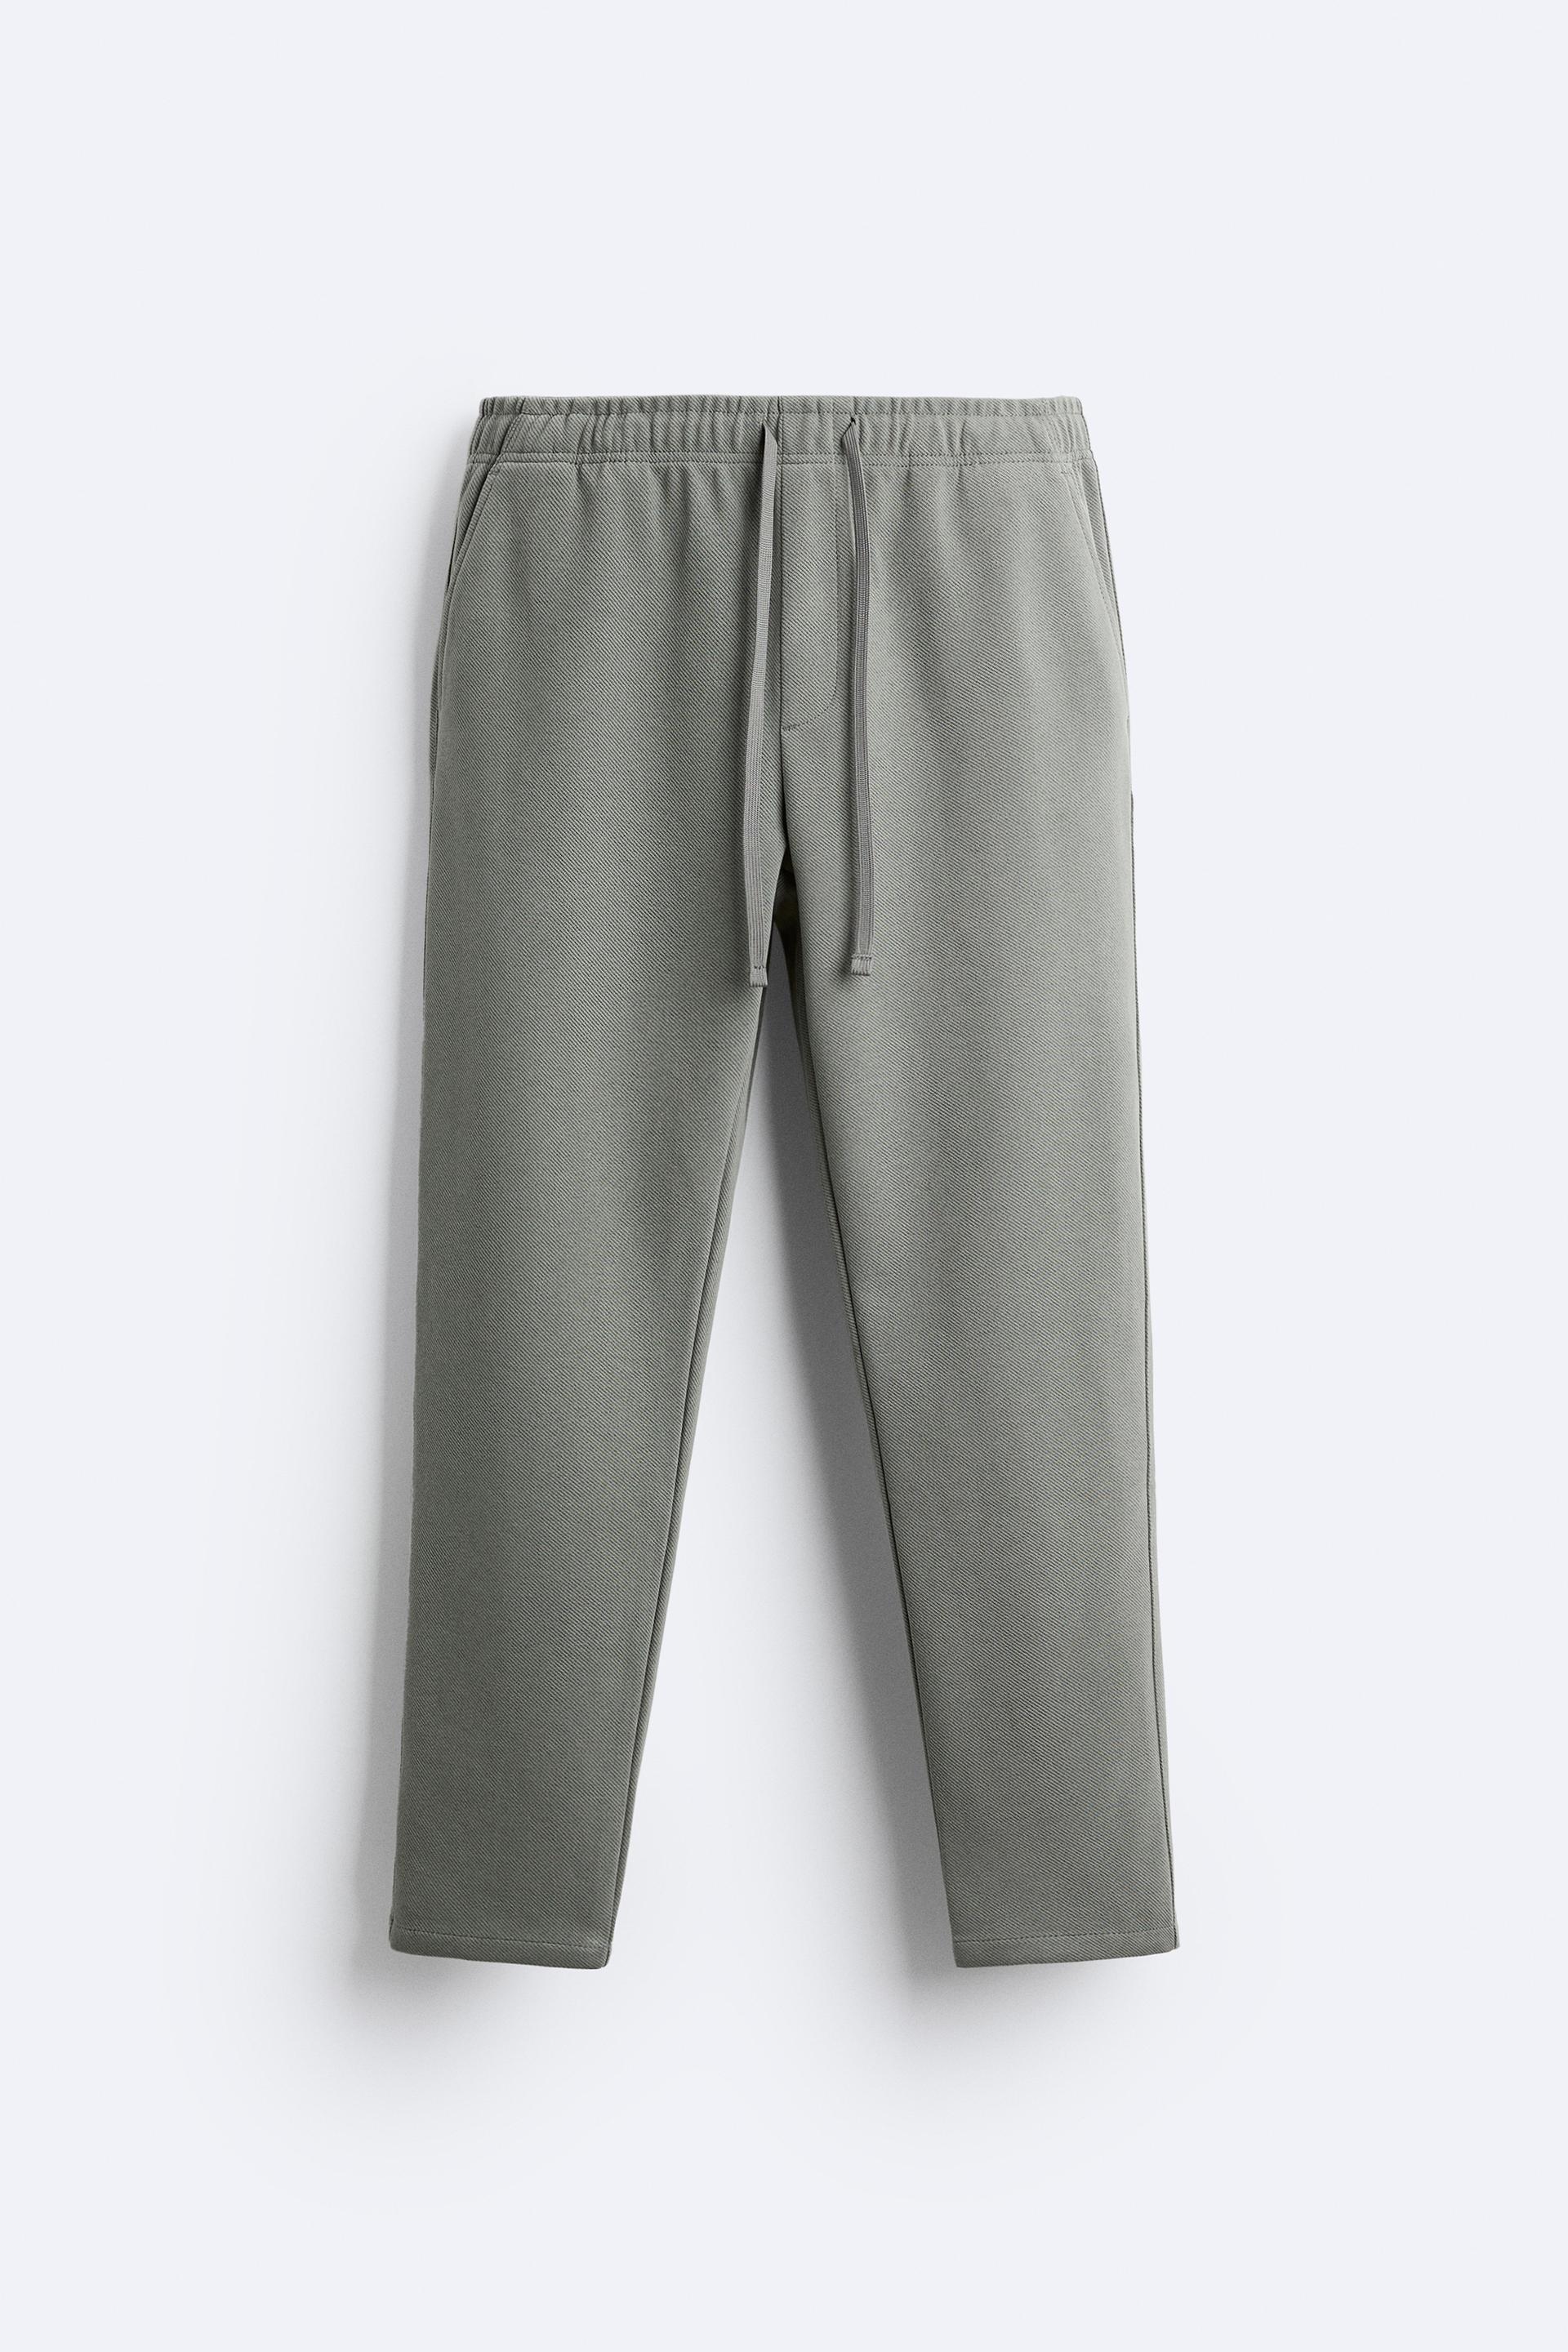 Thoughts on Zara trousers? I am a little scared to buy these because of  mixed reviews about the fit online. They are quite expensive too. Anyone  who is around 28-30 waist size